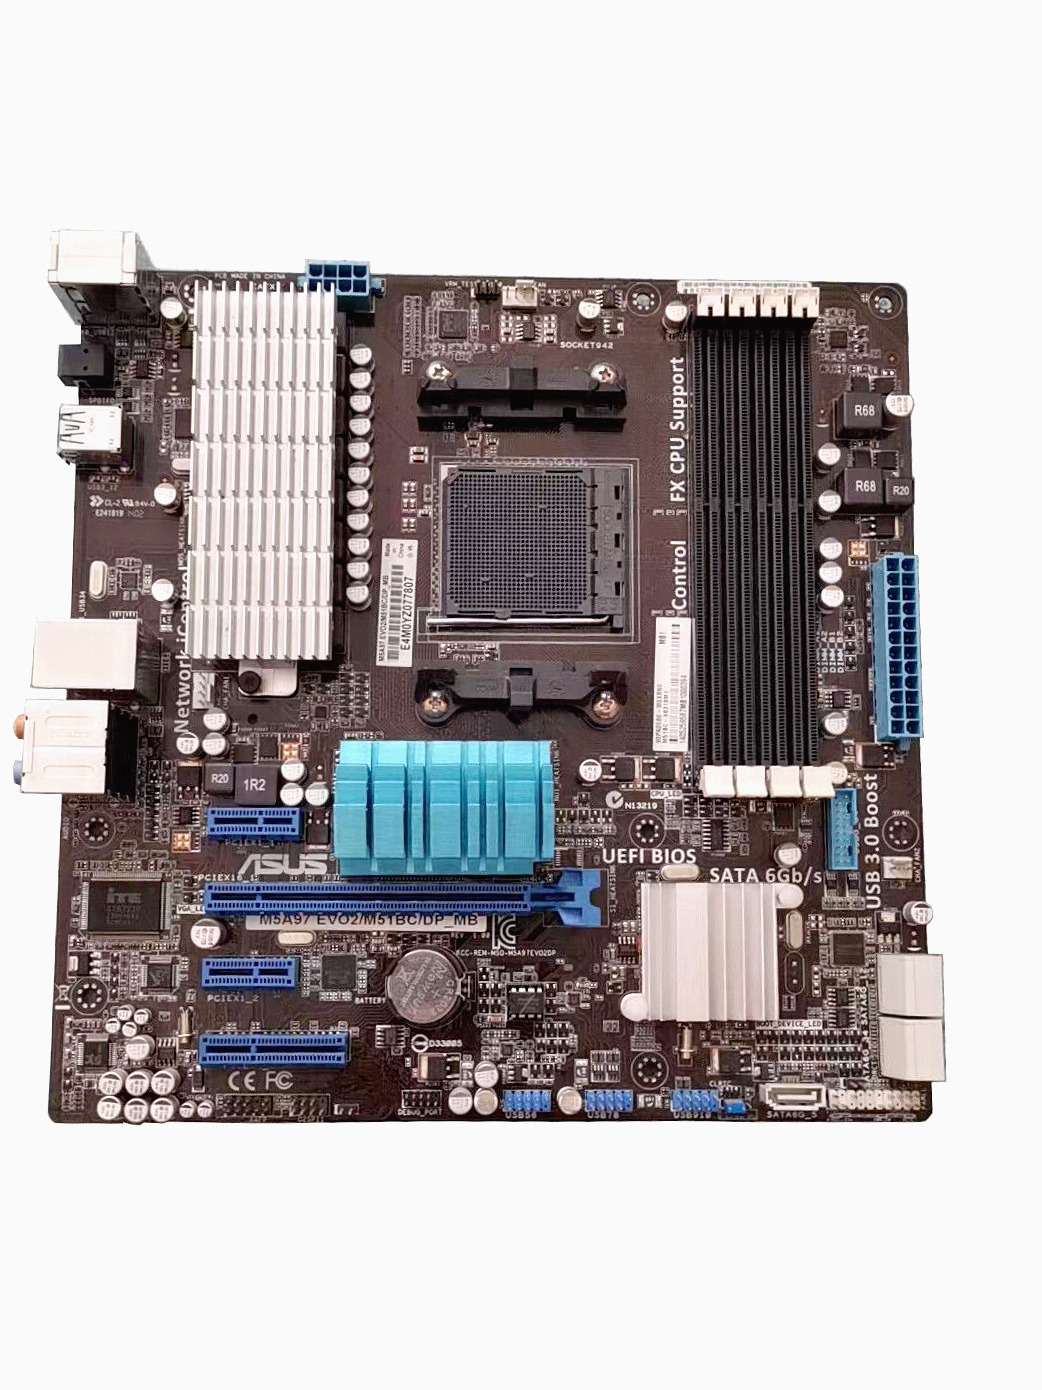 ASUS M5A97 EVO2/M51BC/DP_MB FX CPU Support AM3+ Desktop Motherboard - Untested